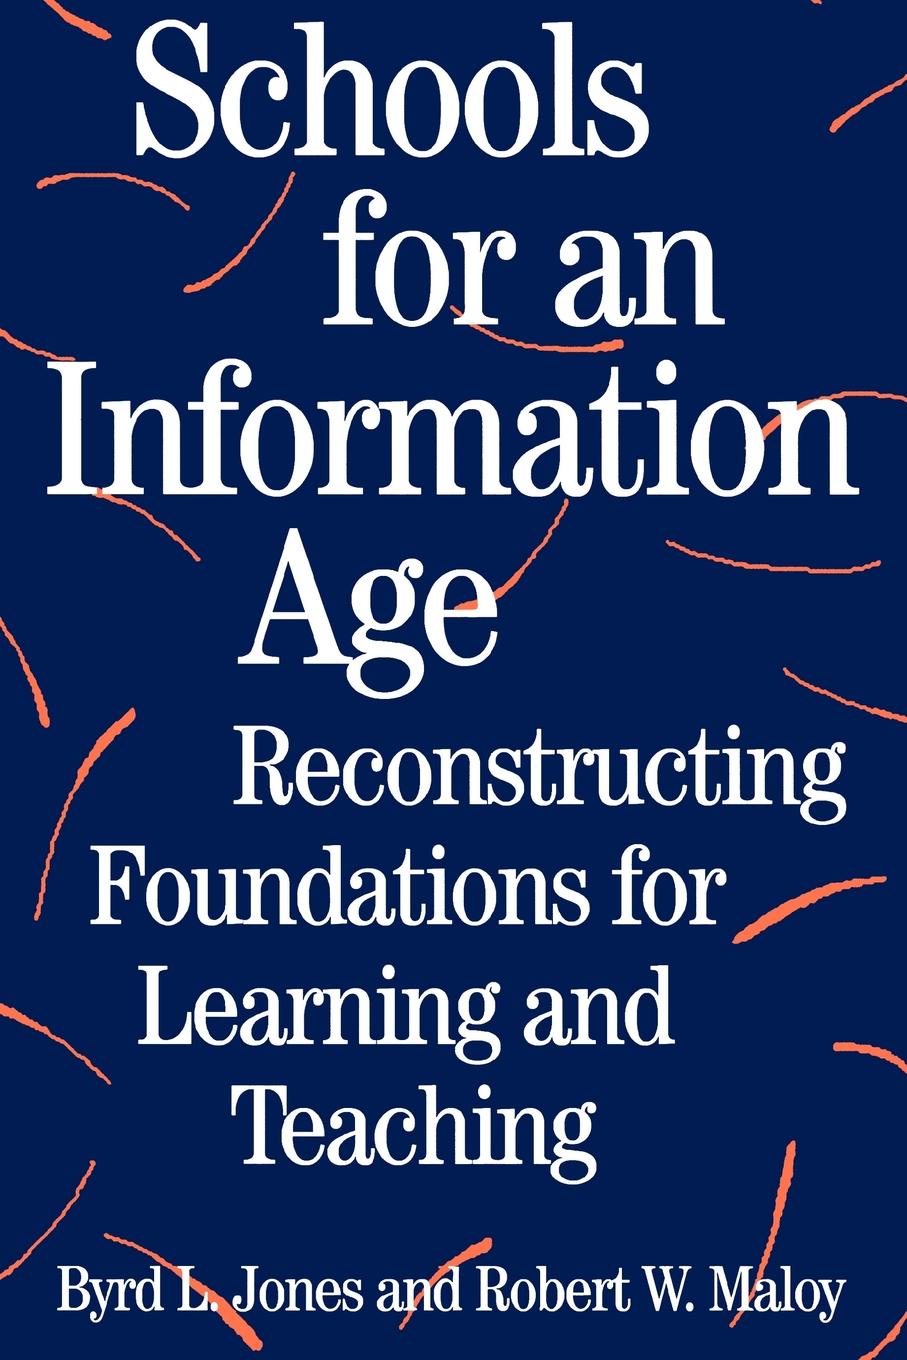 Schools for an Information Age. Reconstructing Foundations for Learning and Teaching